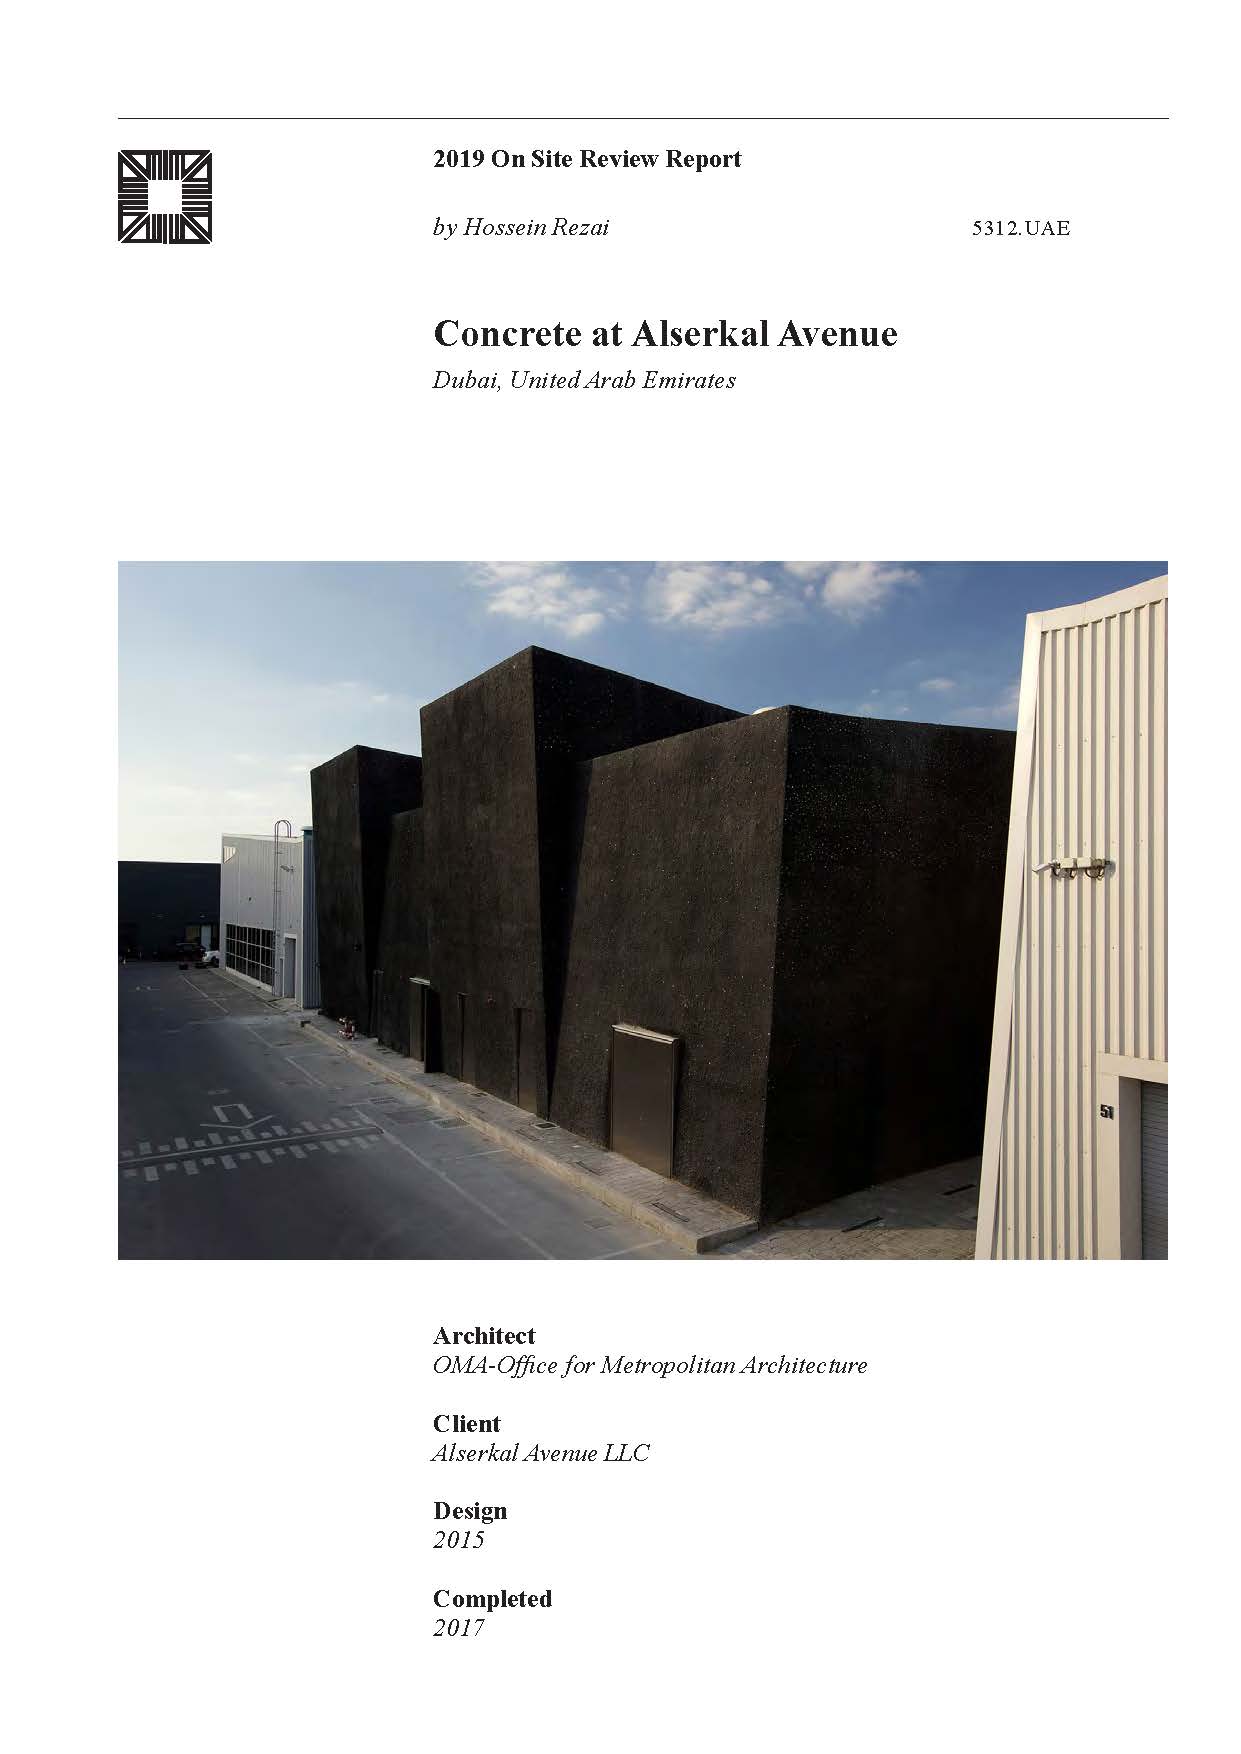 Concrete at Al-Serkal Avenue - The On-site Review Report, formerly called the Technical Review, is a document prepared for the Aga Khan Award for Architecture by commissioned independent reviewers who report to the Master Jury about a specific shortlisted project. The reviewers are architectural professionals specialised in various disciplines, including housing, urban planning, landscape design, and restoration. Their task is to examine, on-site, the shortlisted projects to verify project data seek. The reviewers must consider a detailed set of criteria in their written reports, and must also respond to the specific concerns and questions prepared by the Master Jury for each project. This process is intensive and exhaustive making the Aga Khan Award process entirely unique.